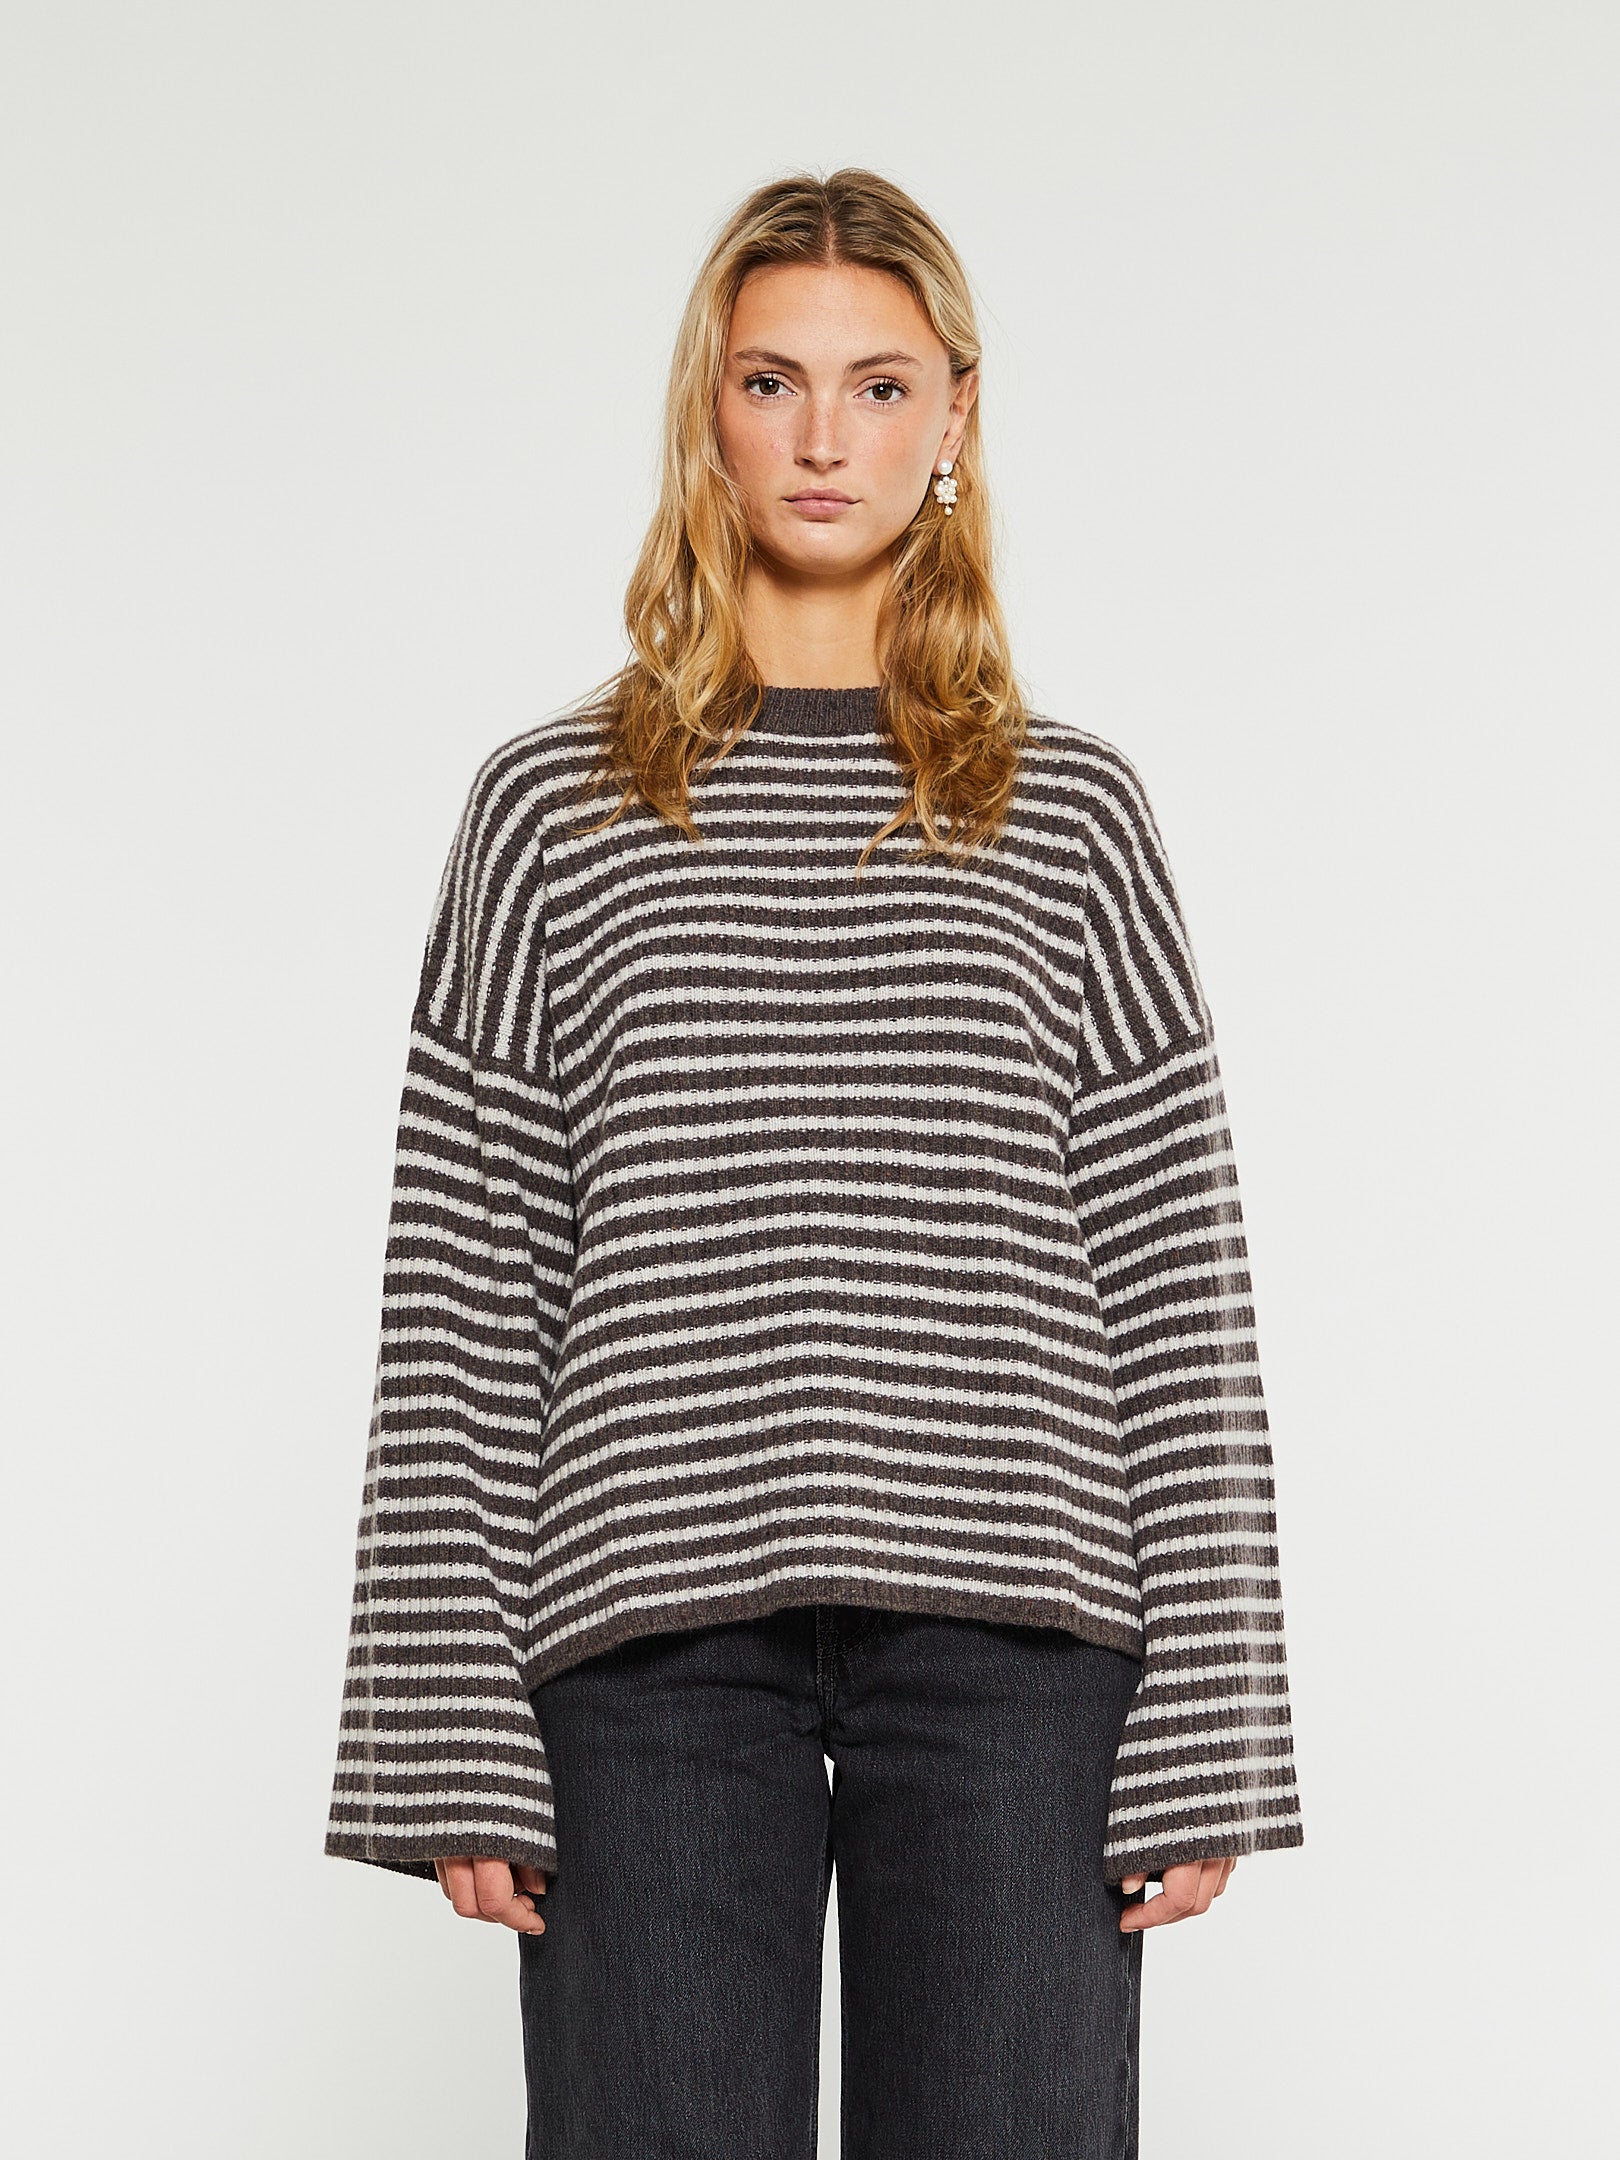 See stoy wide the selection | Knitwear at STOY – – Page